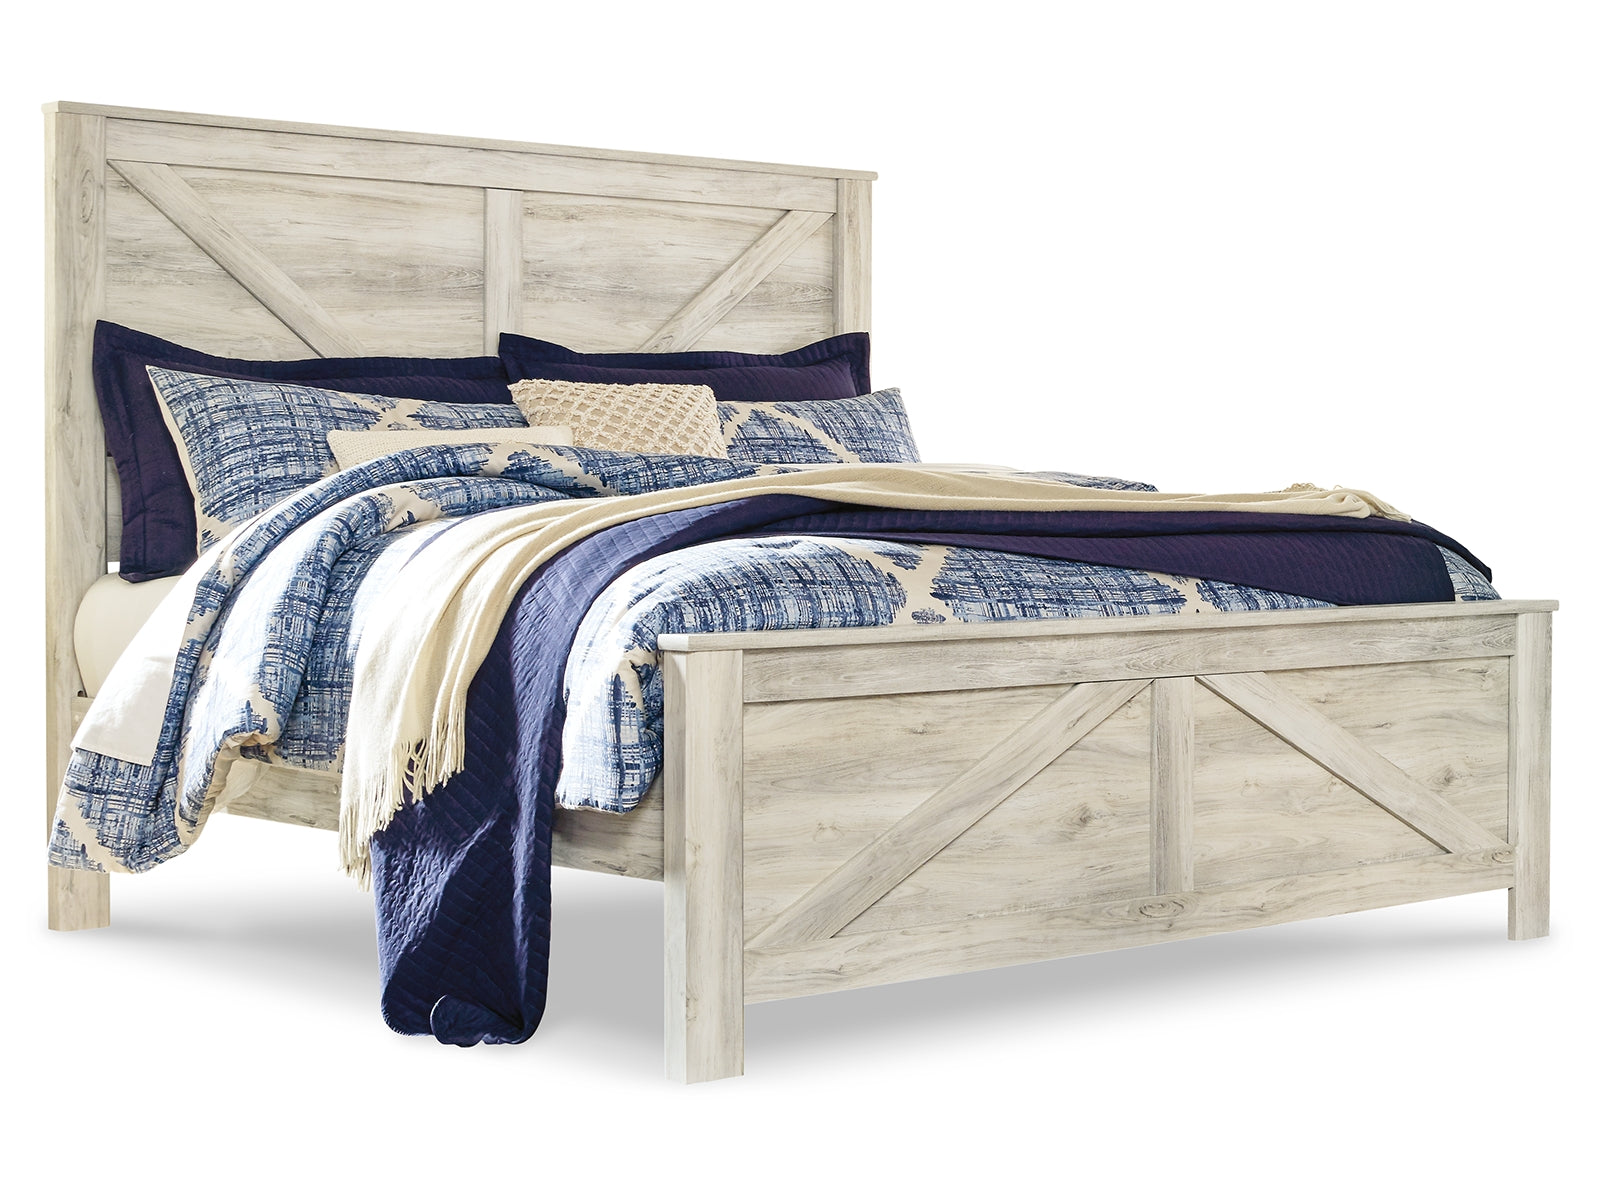 Bellaby King Crossbuck Panel Bed with Dresser